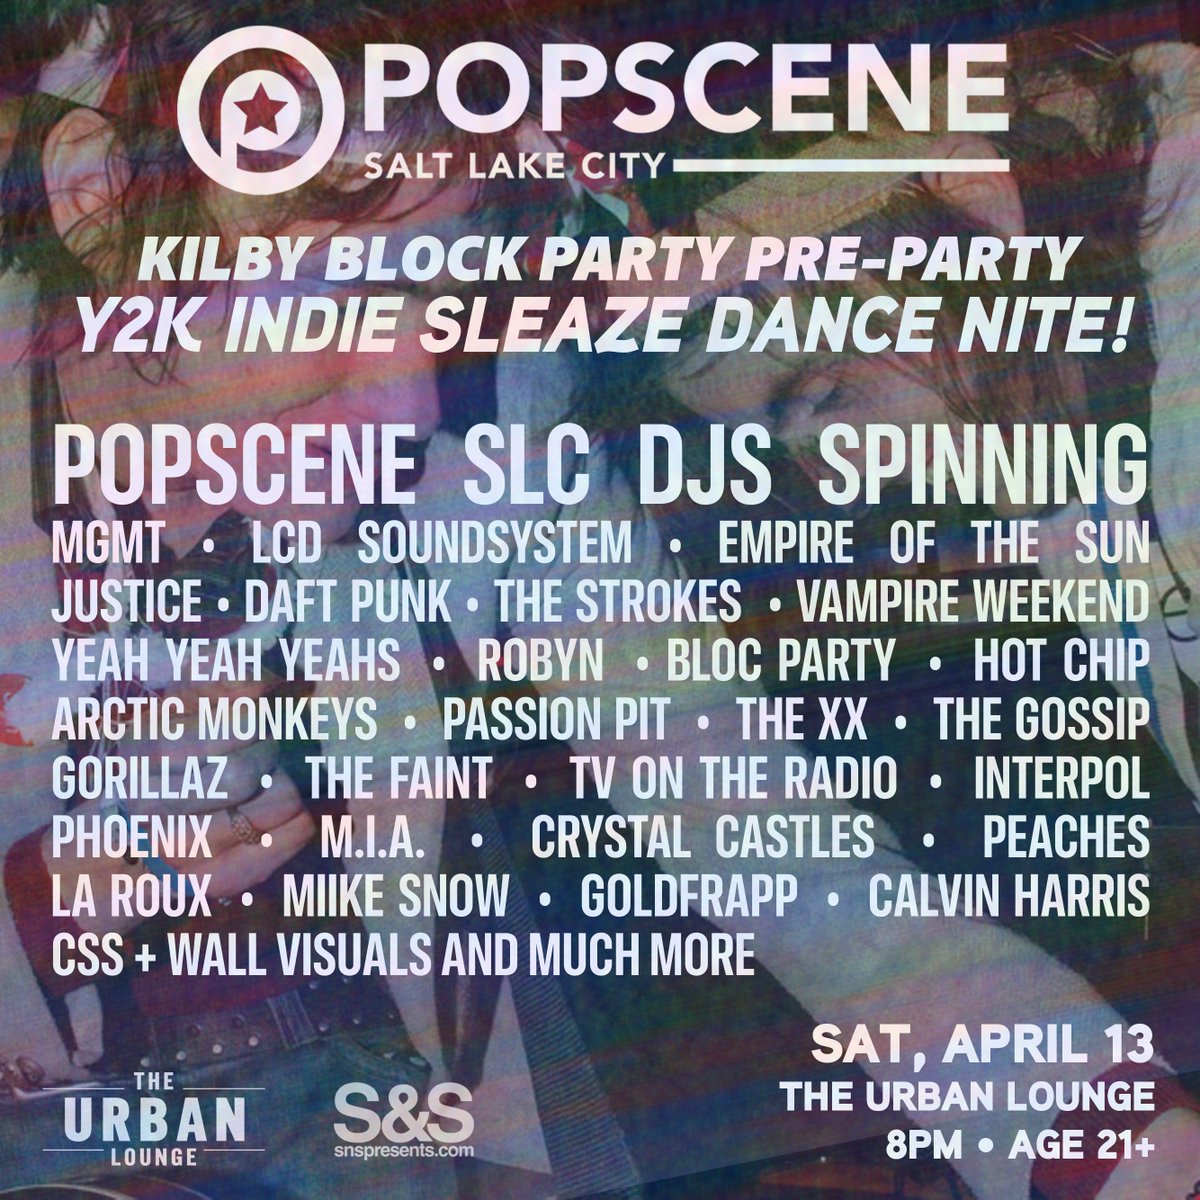 Popscene SLC and S&S Co-Presents: Kilby Block Party Pre-Party 🪩 Y2K INDIE SLEAZE NITE! Saturday, 4/13 @UrbanLoungeSLC 8pm/21+ DJs + visuals + live performance by 2000s indie tribute band from SF @NAScum @kilbyblockparty Limited $15 tix! 🎟️⬇️ 24tix.com/event/20949542…